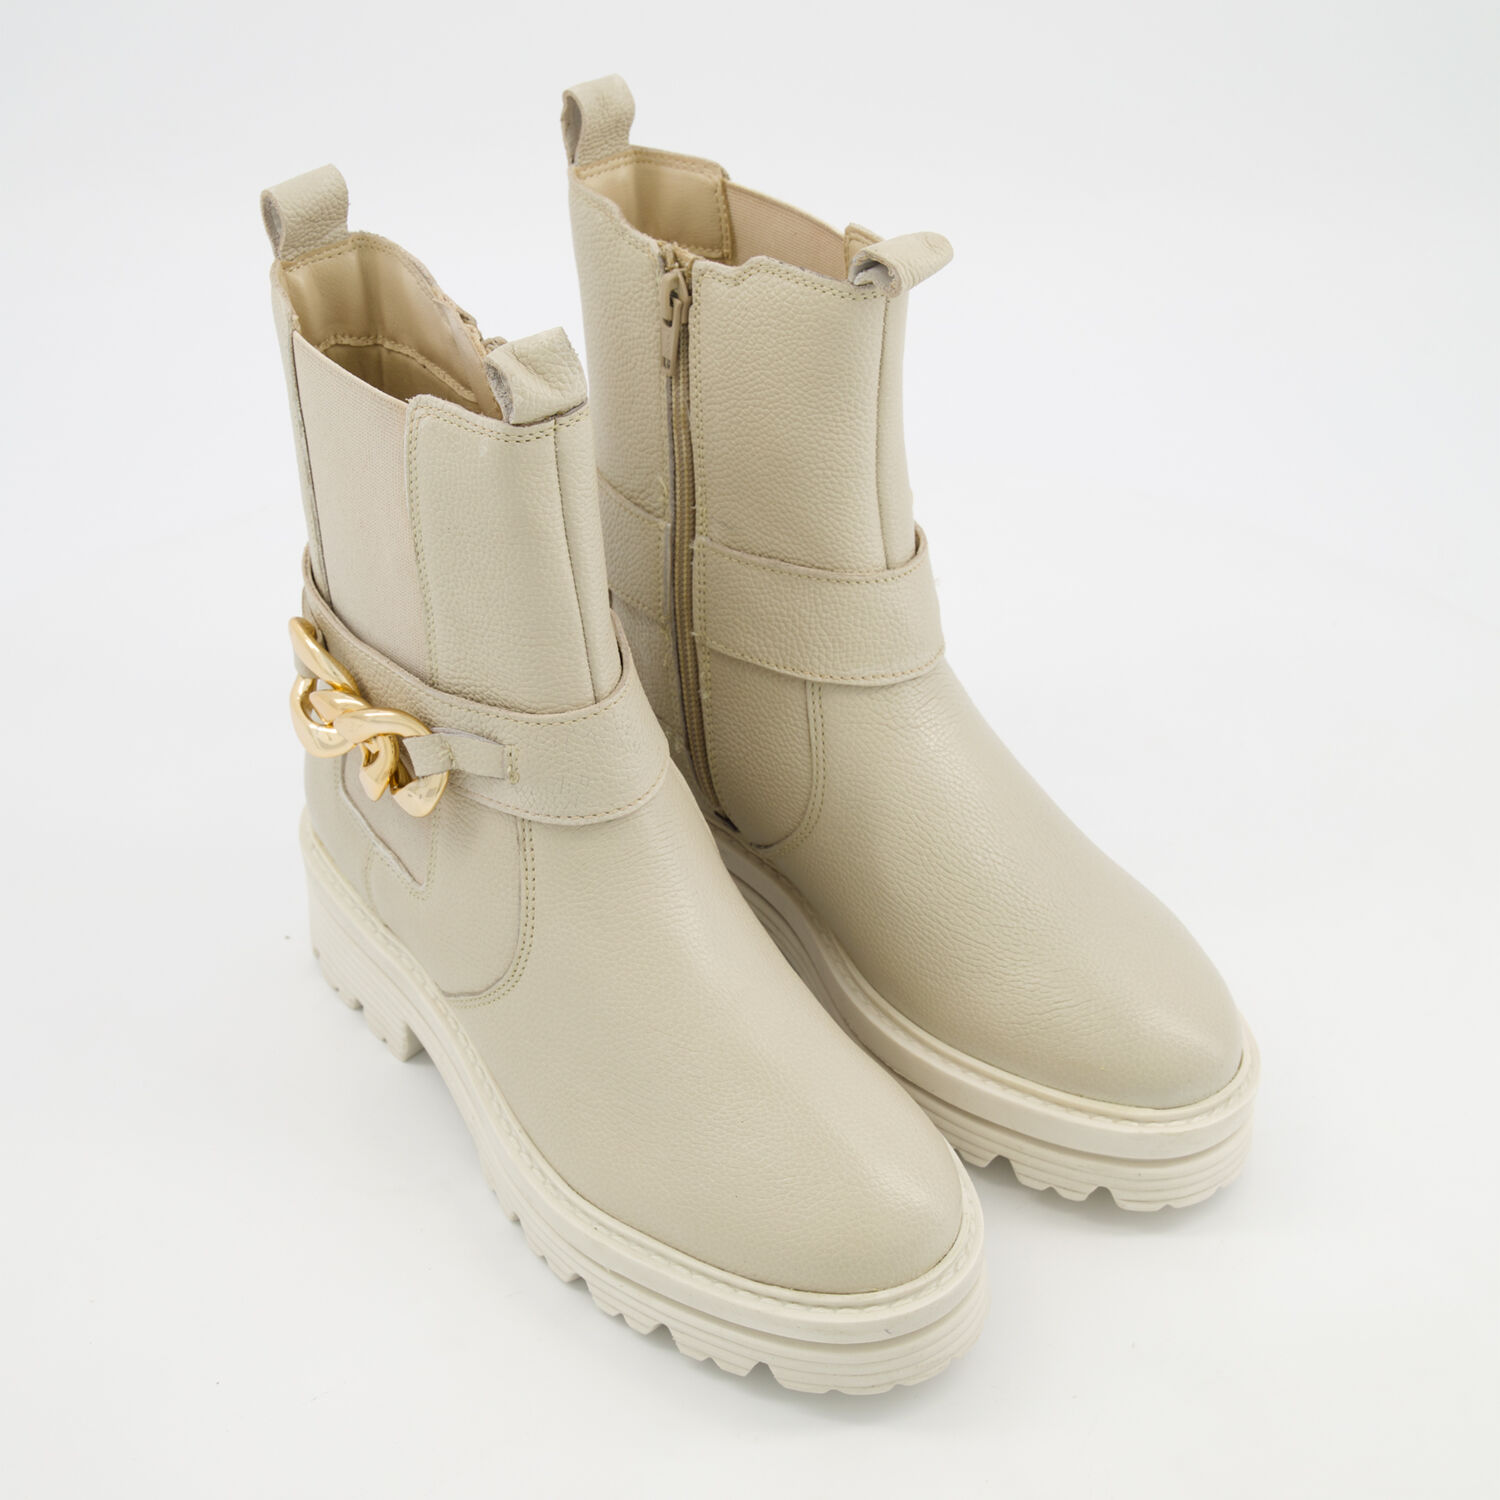 Off White Leather Flat Ankle Boots - TK Maxx UK